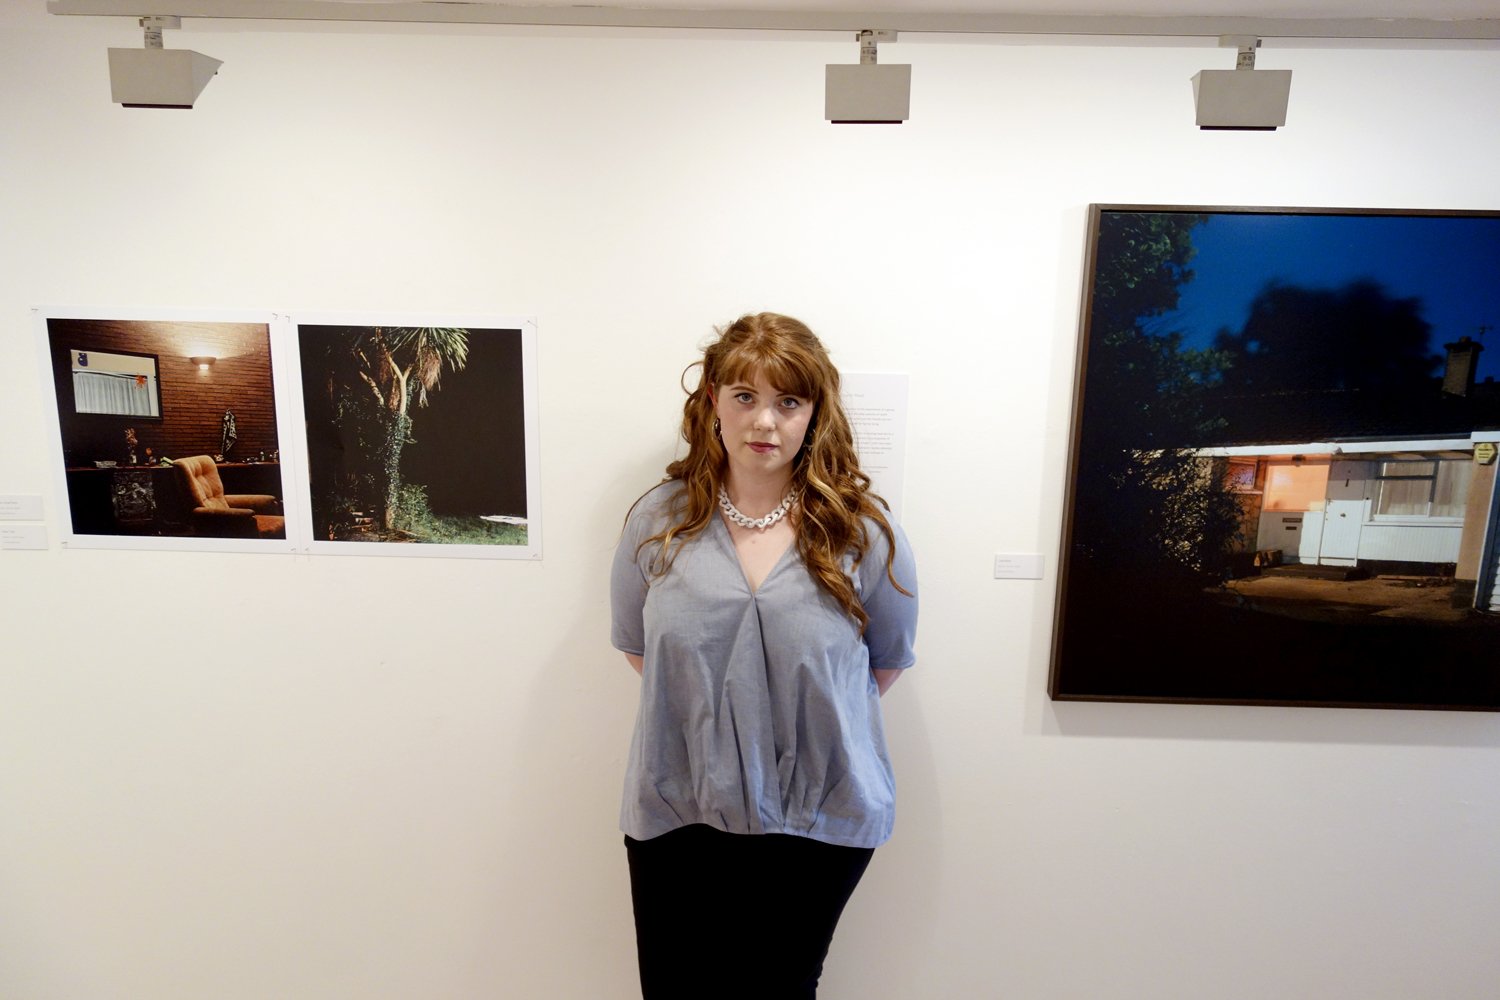  Photographer Emma Maguire with her work 